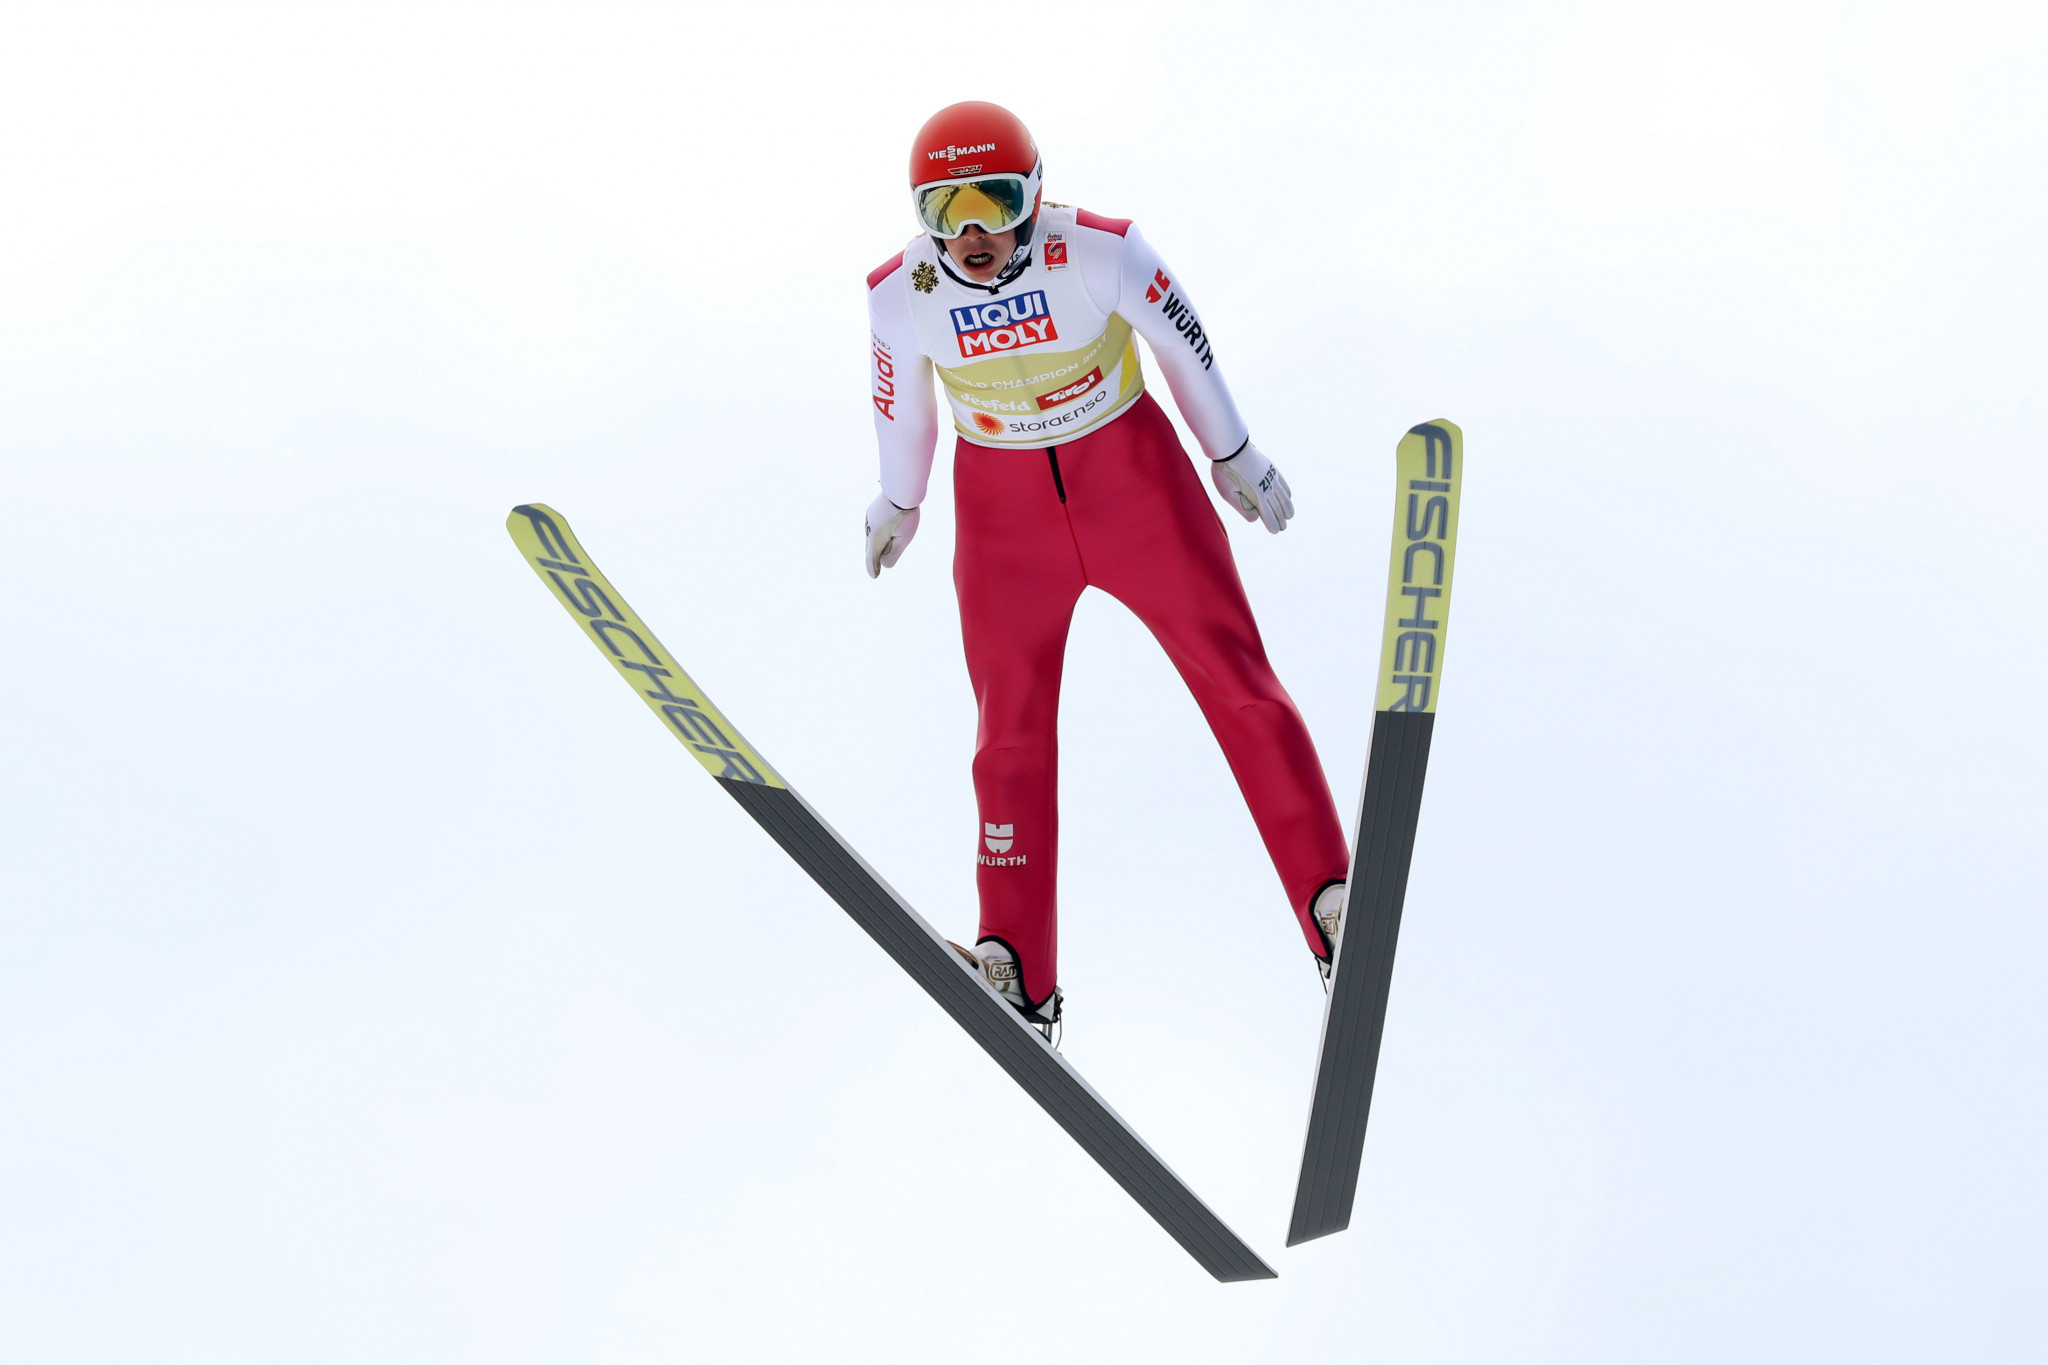 Frenzel and Rydzek among absentees as FIS Nordic Combined World Cup begins in Oslo